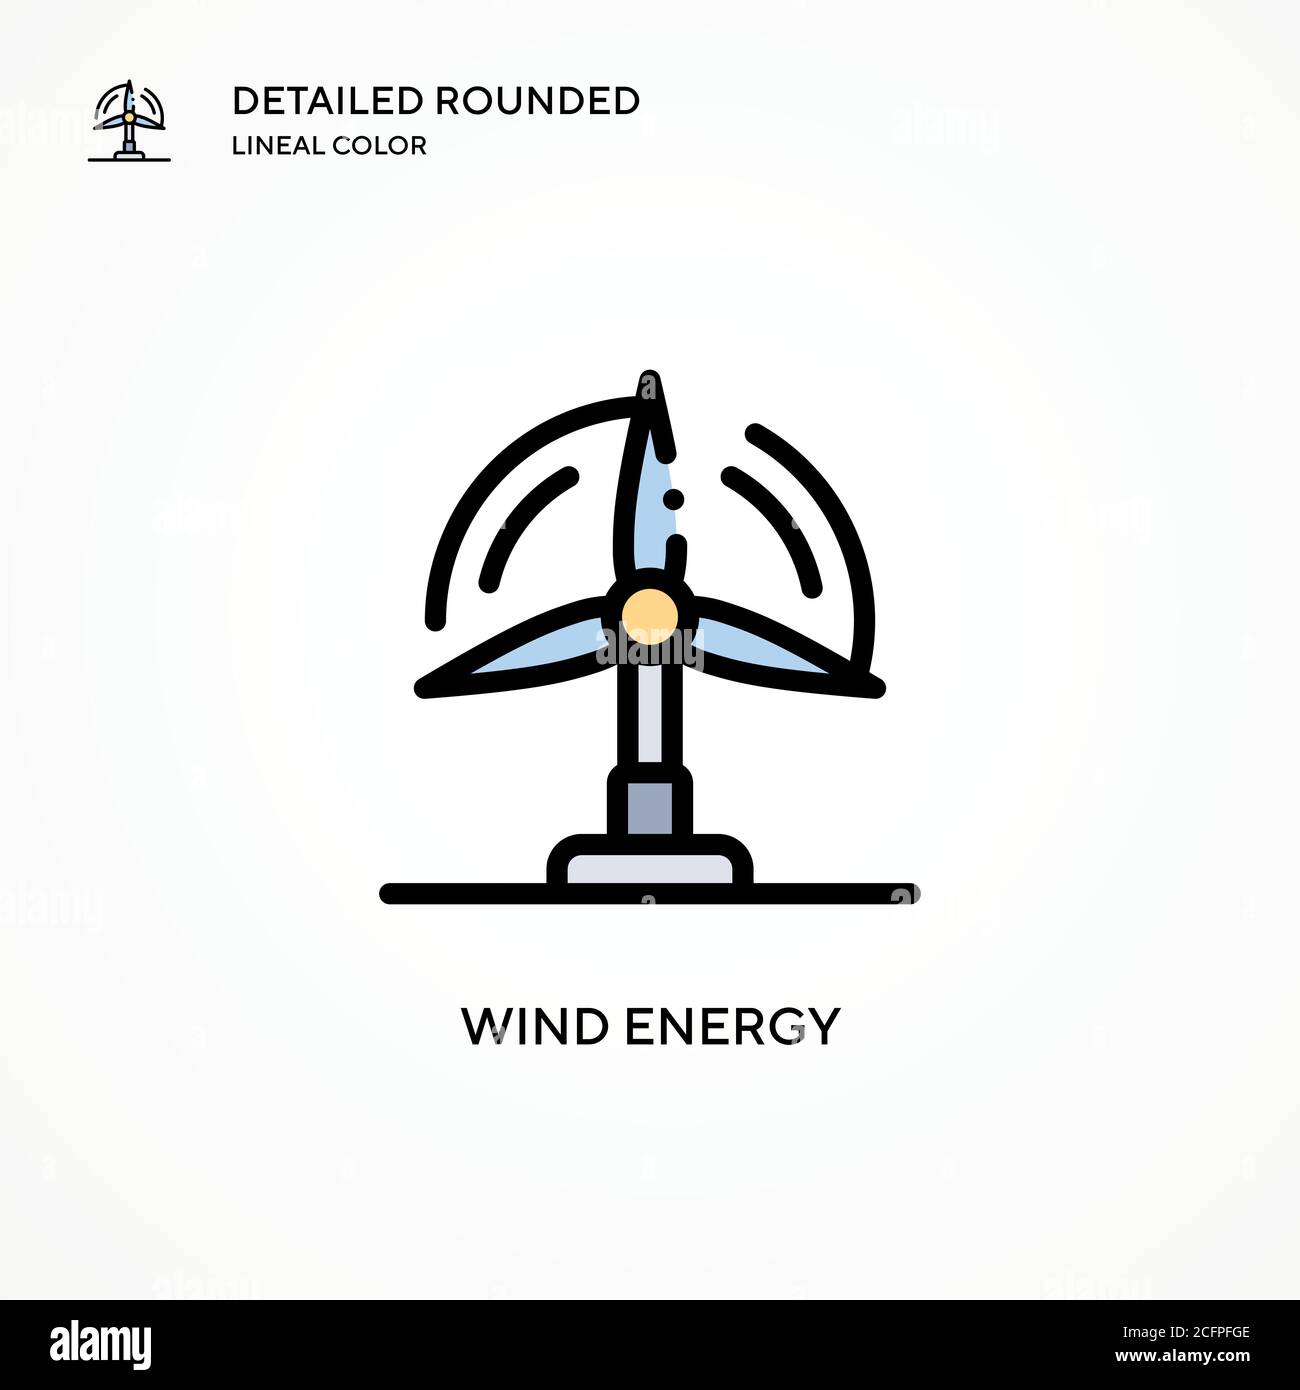 Wind energy vector icon. Modern vector illustration concepts. Easy to edit and customize. Stock Vector